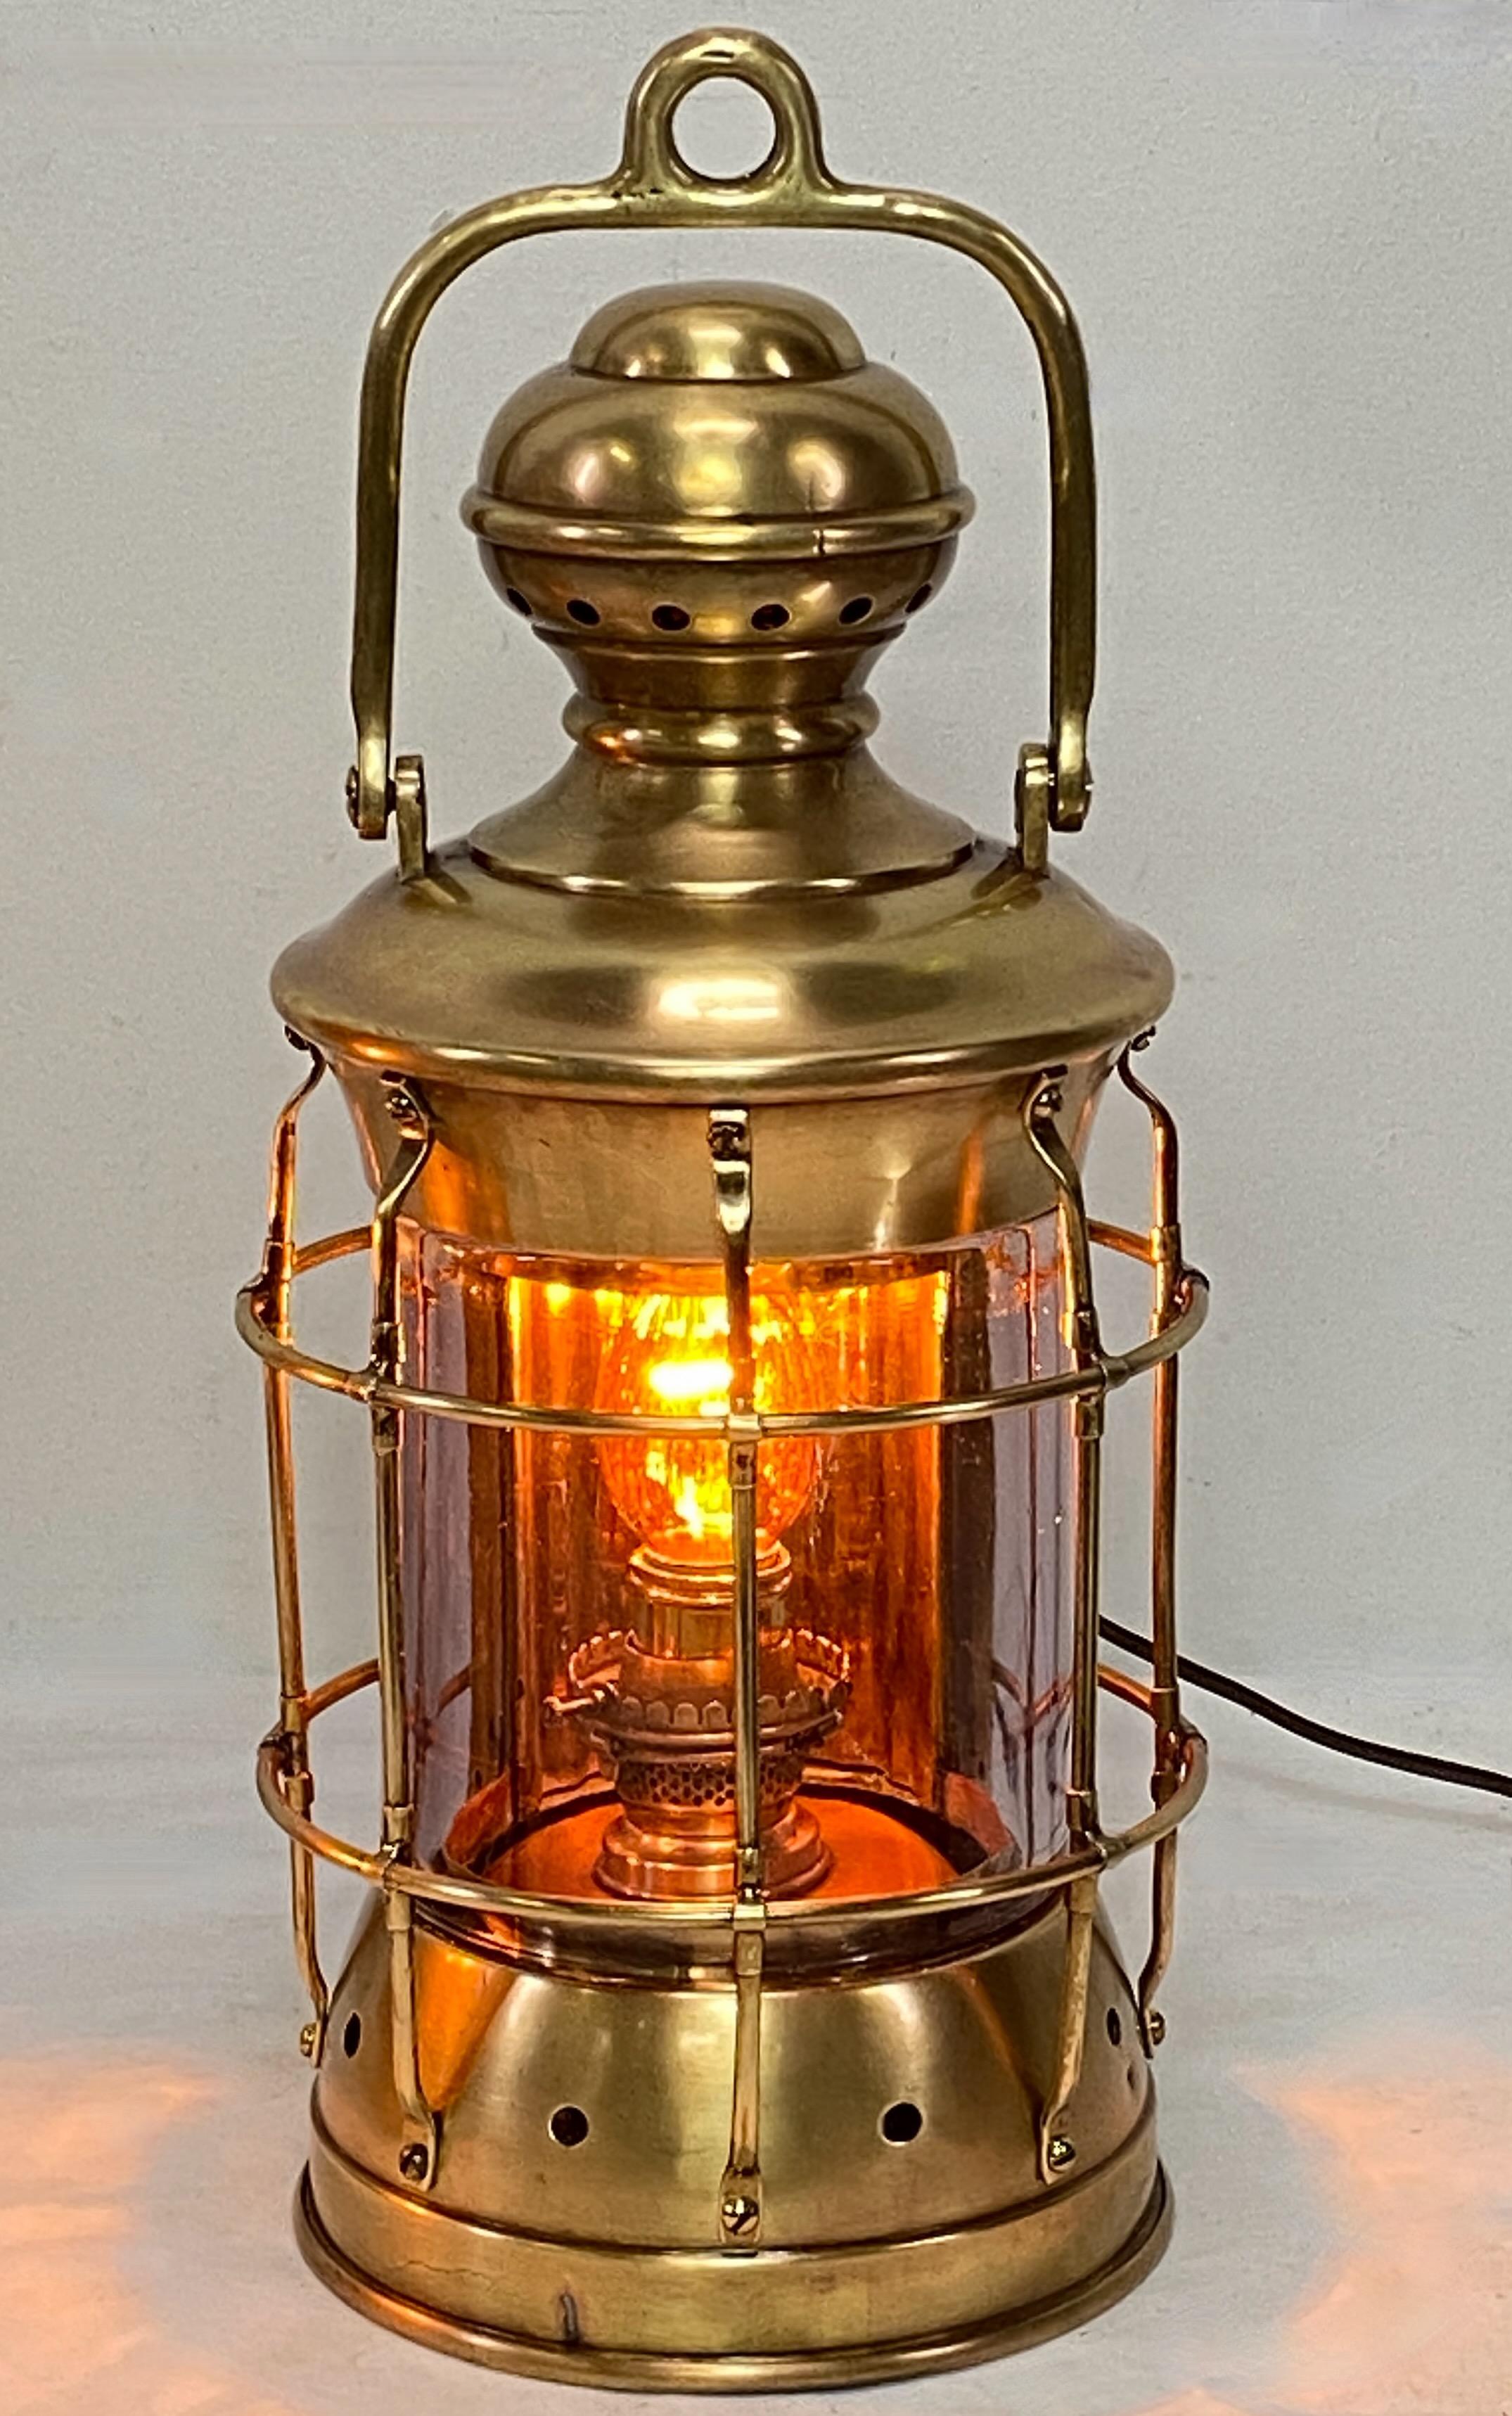 Antique brass and glass nautical lantern. Has original oil font, recently re-wired as a lamp.
Original makers plaque on back.
In excellent condition.